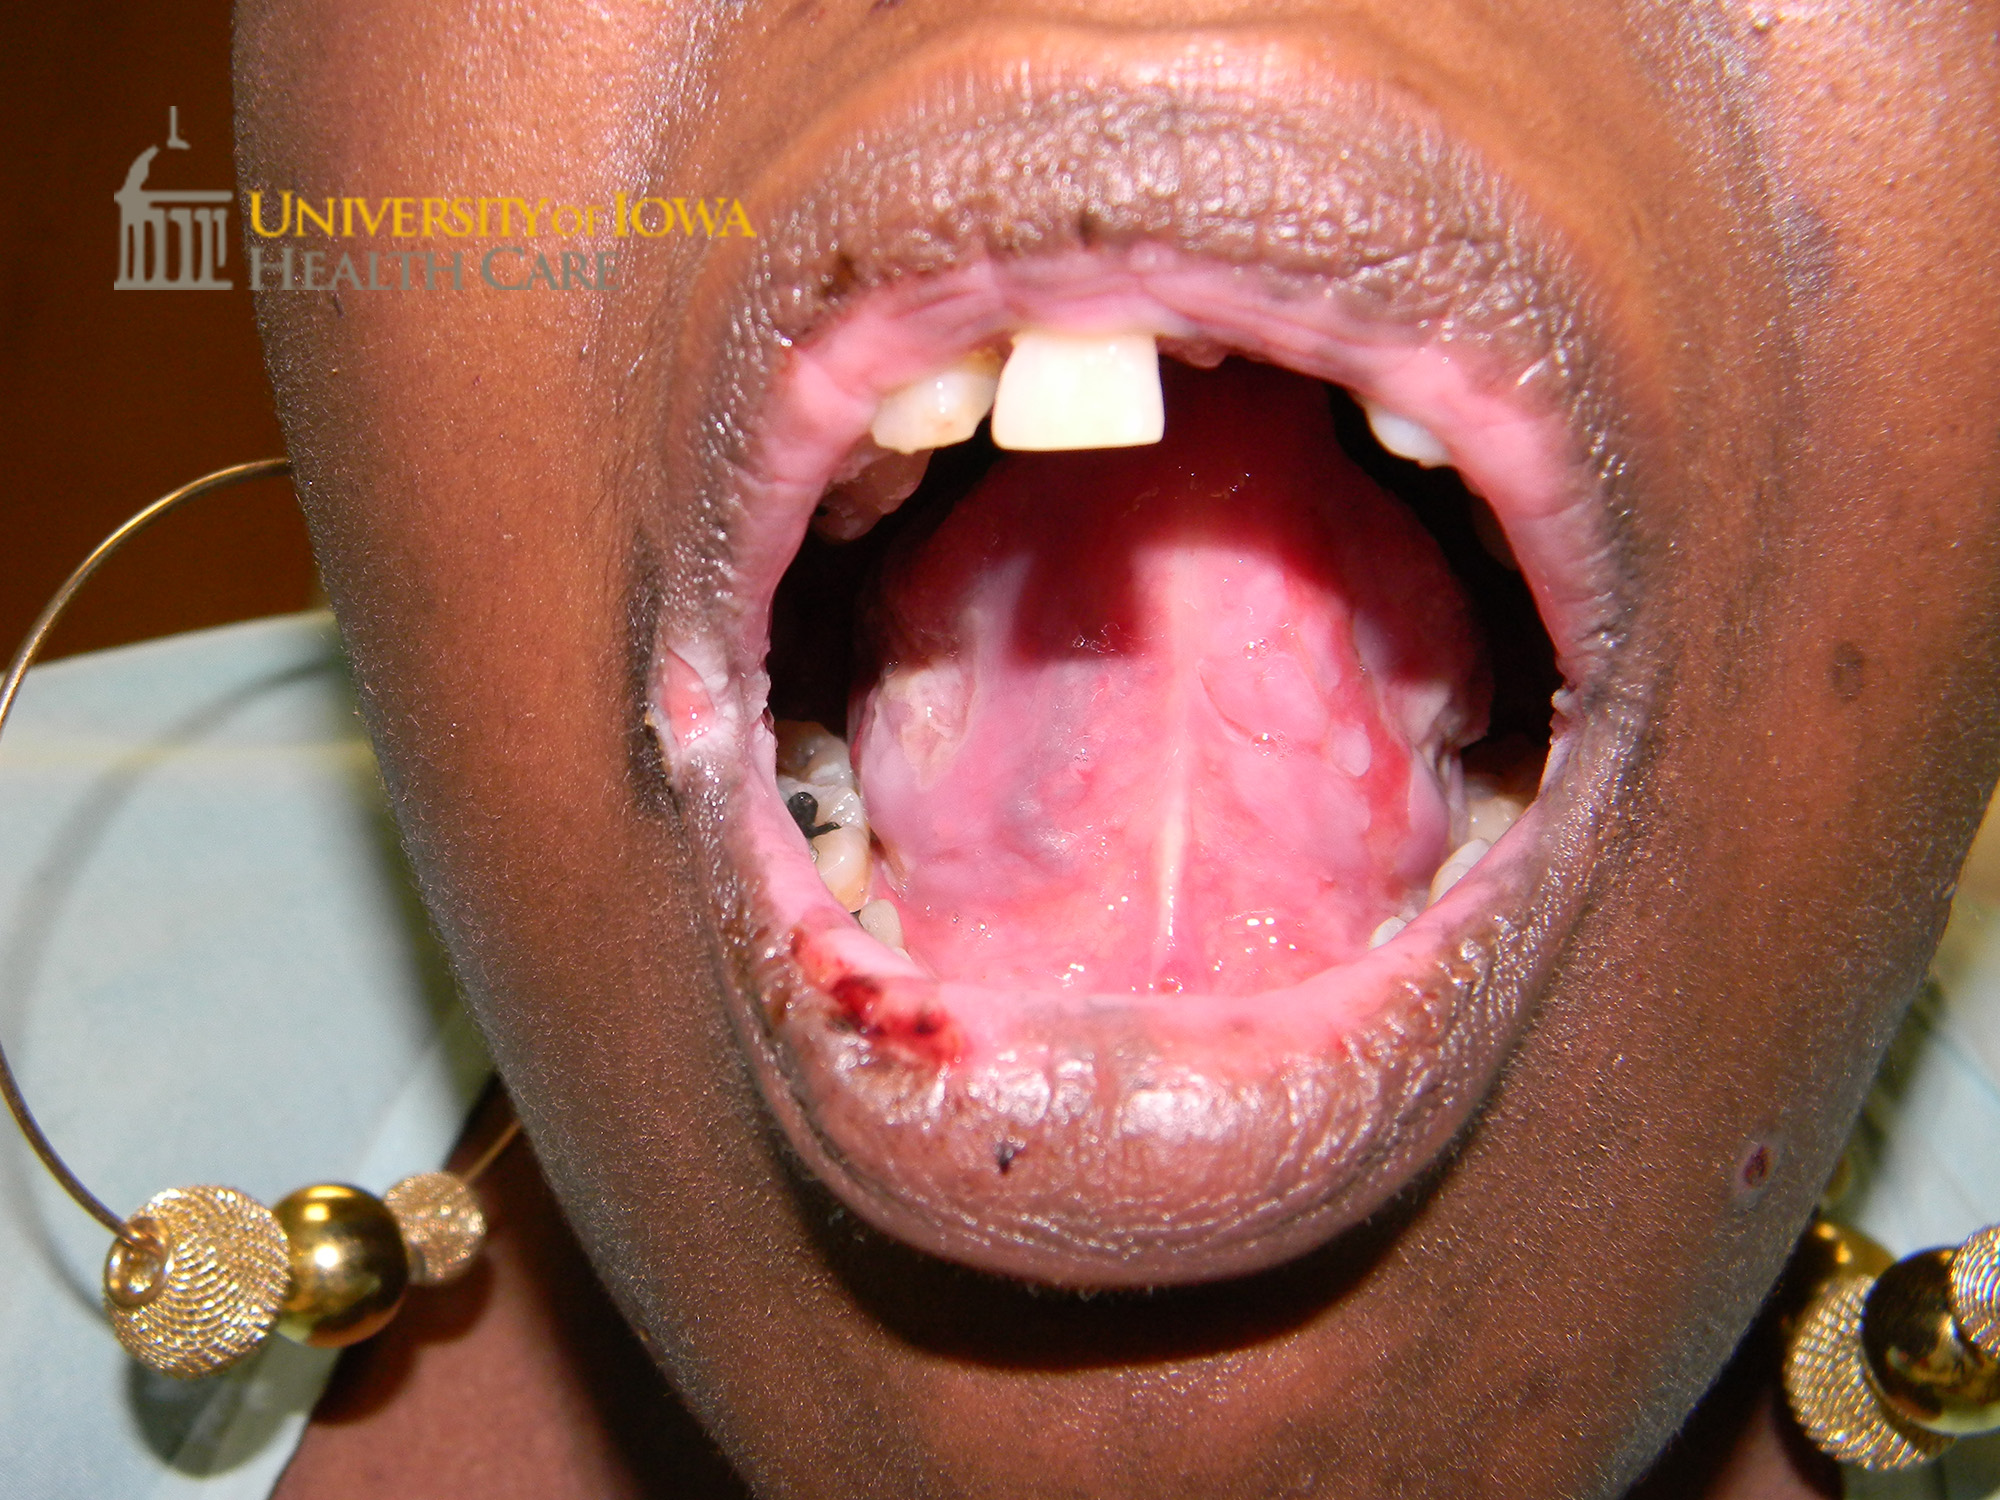 Superficial erosions on the mucosal lip and oral mucosa. (click images for higher resolution).